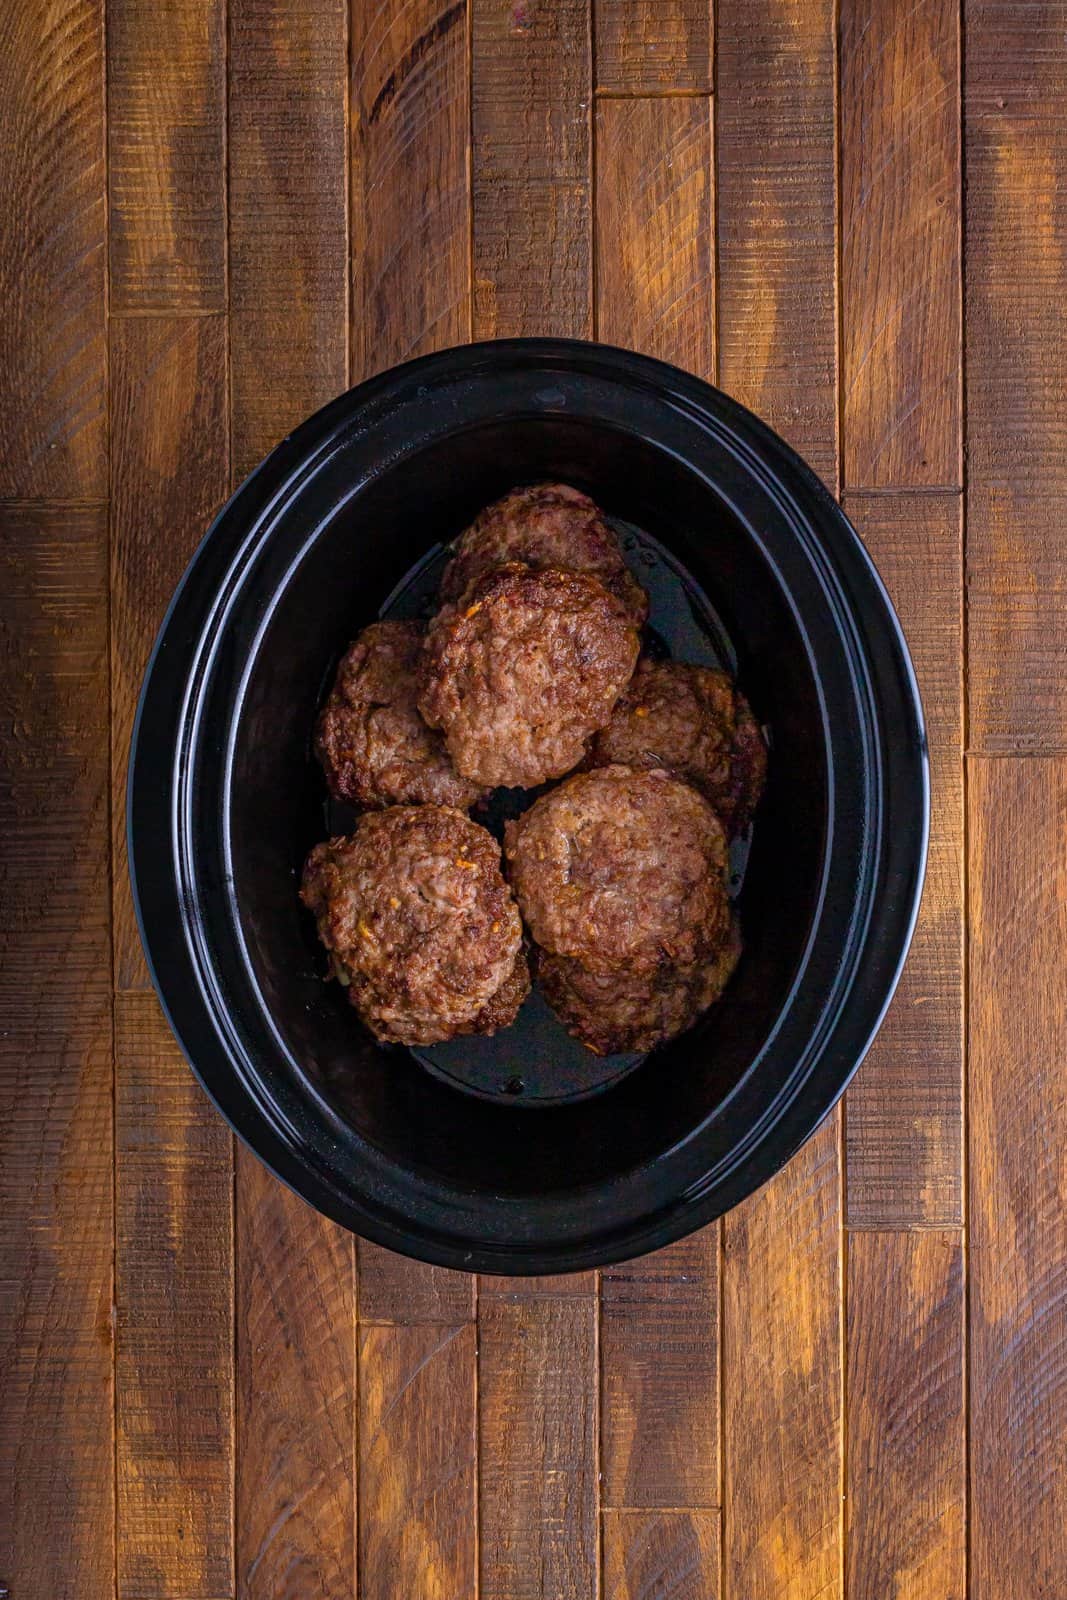 layered hamburger patties in an oval slow cooker.